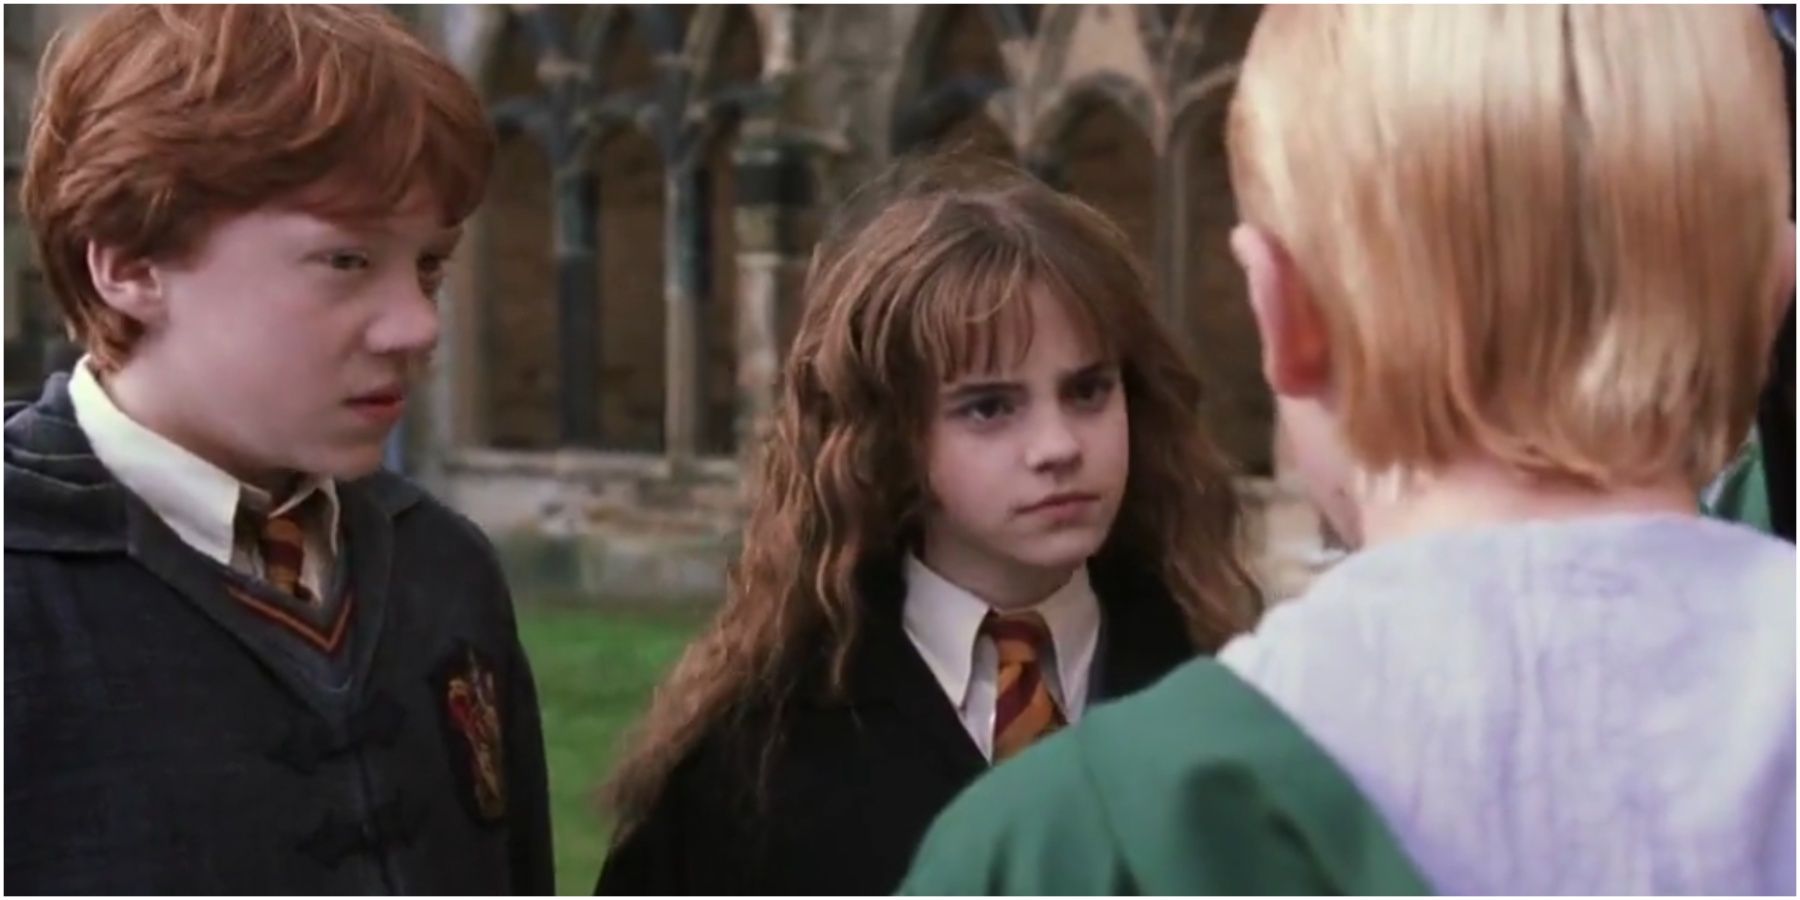 Ron Weasley and Hermione Granger talking to Draco Malfoy in Harry Potter and the Chamber of Secrets.